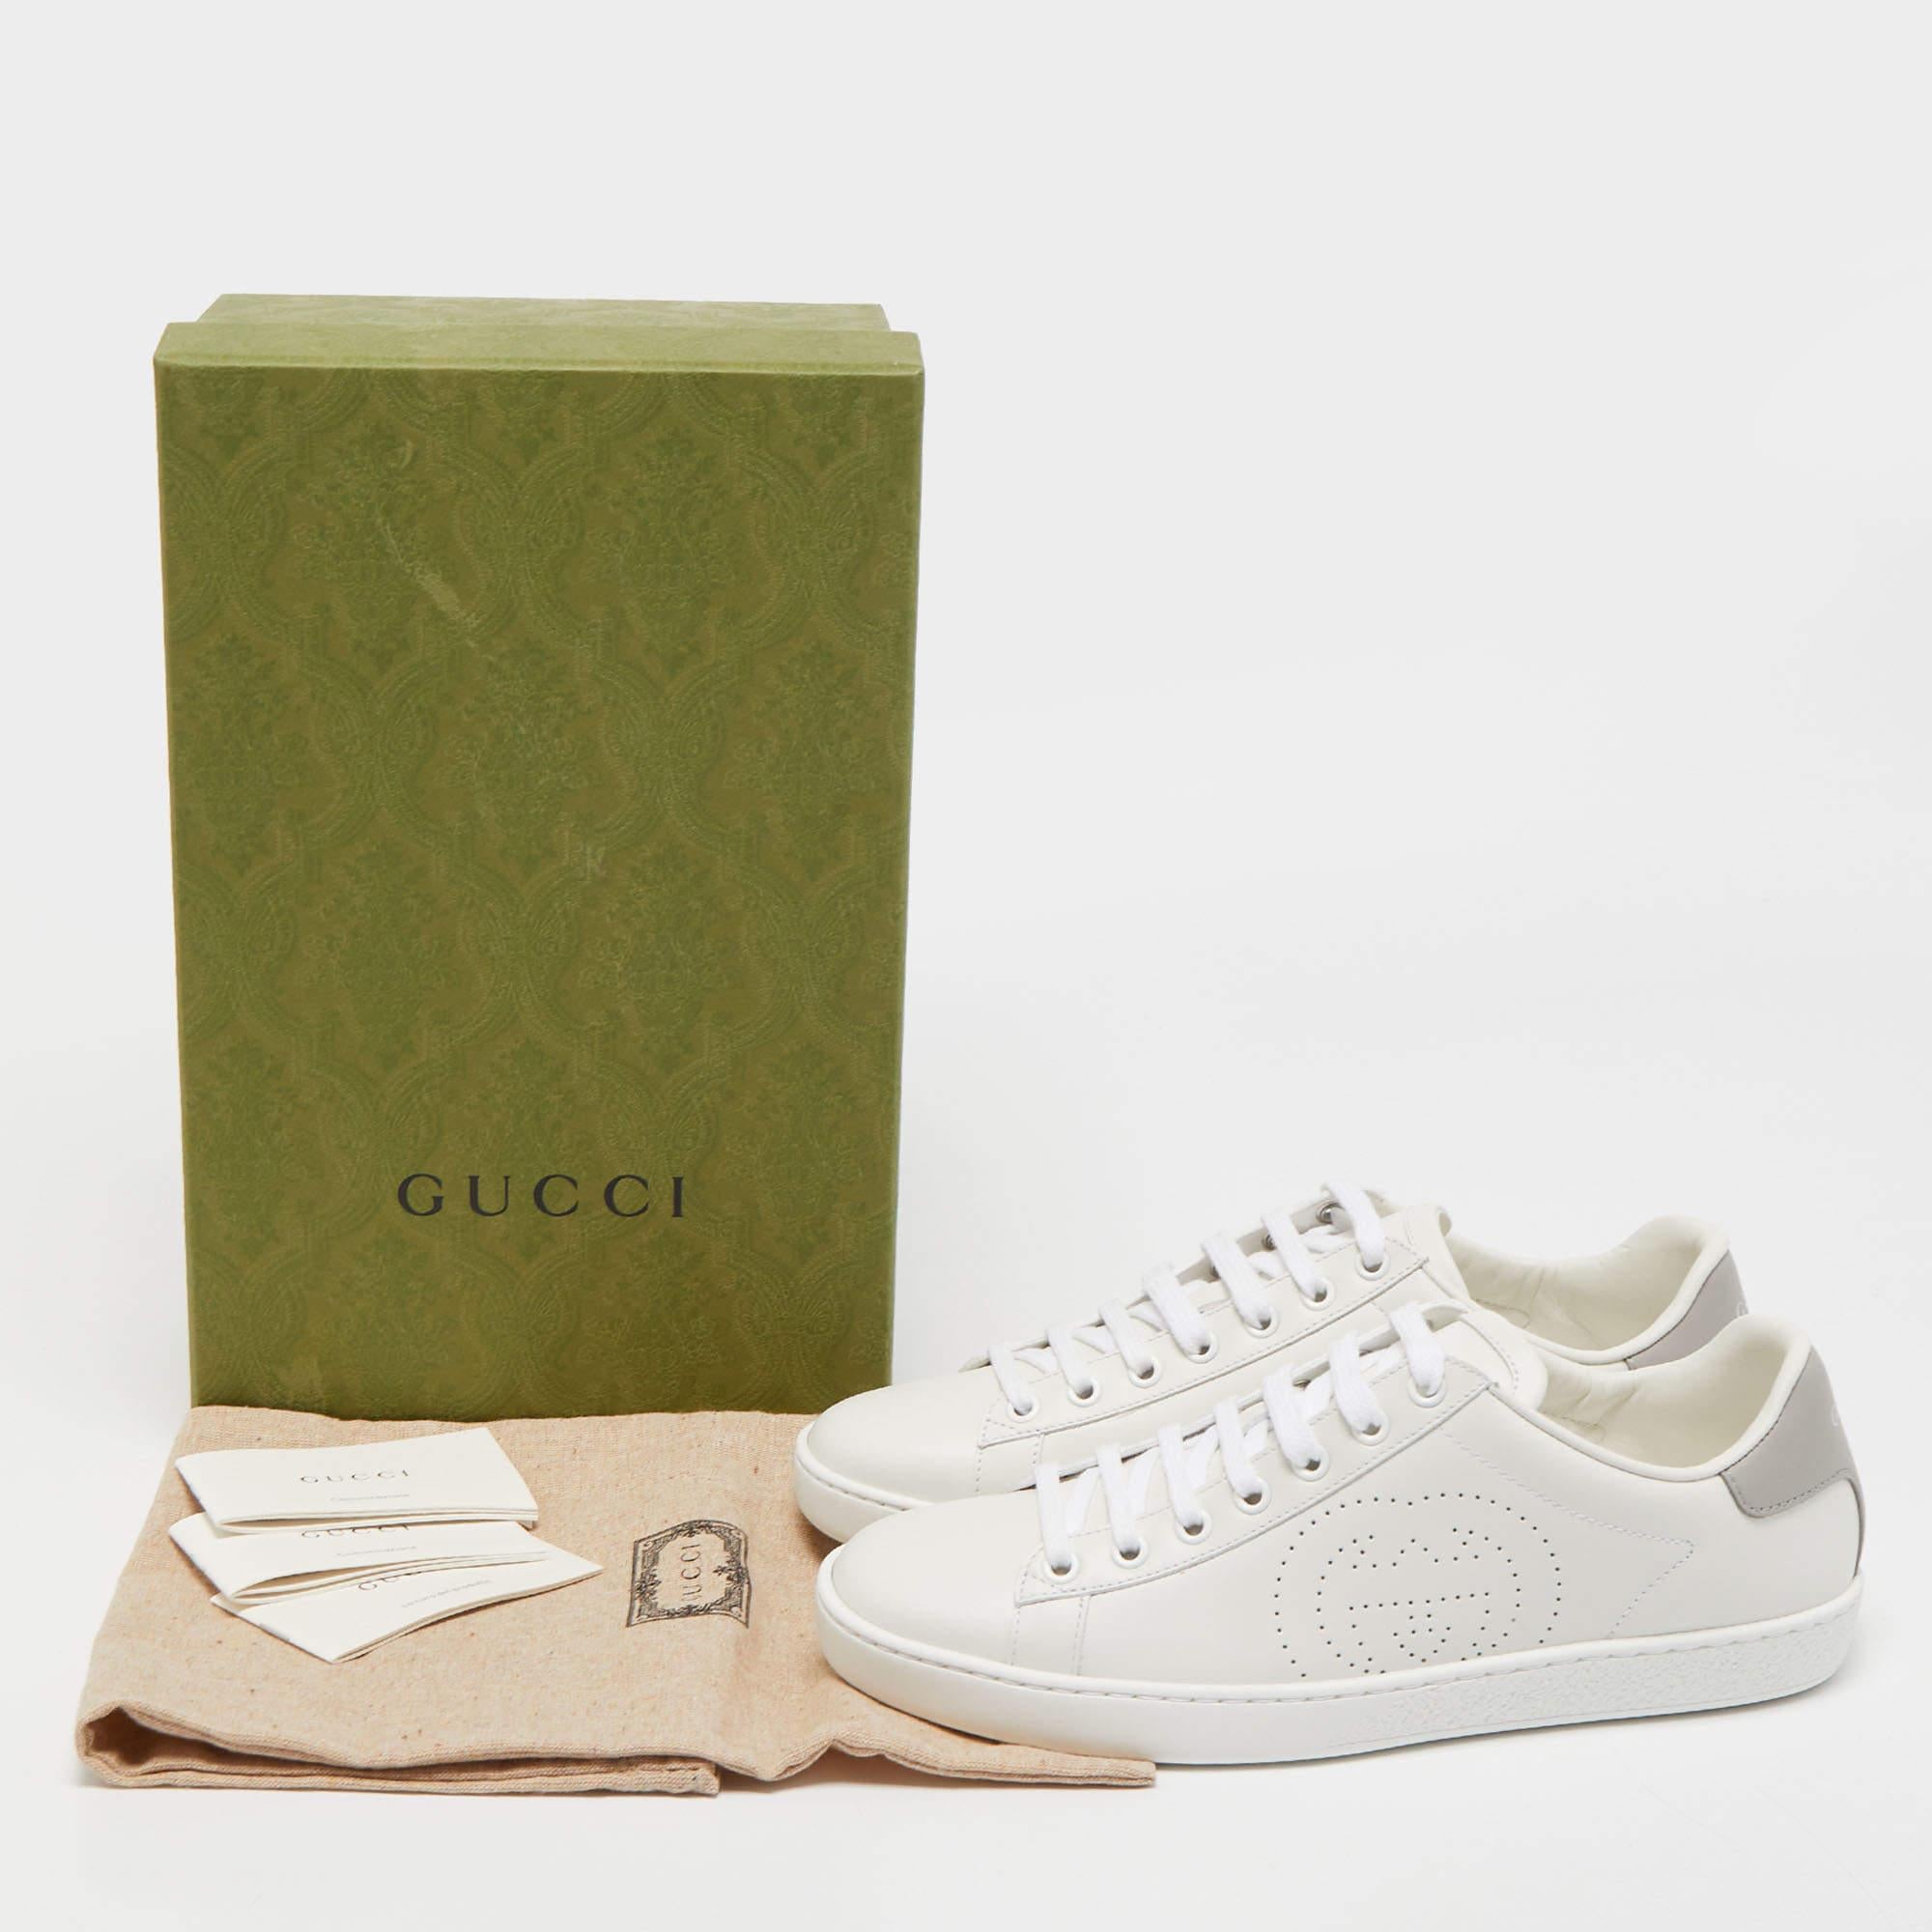 Gucci White Perforated Interlocking G Leather Ace Low Top Sneakers Size 37.5 1